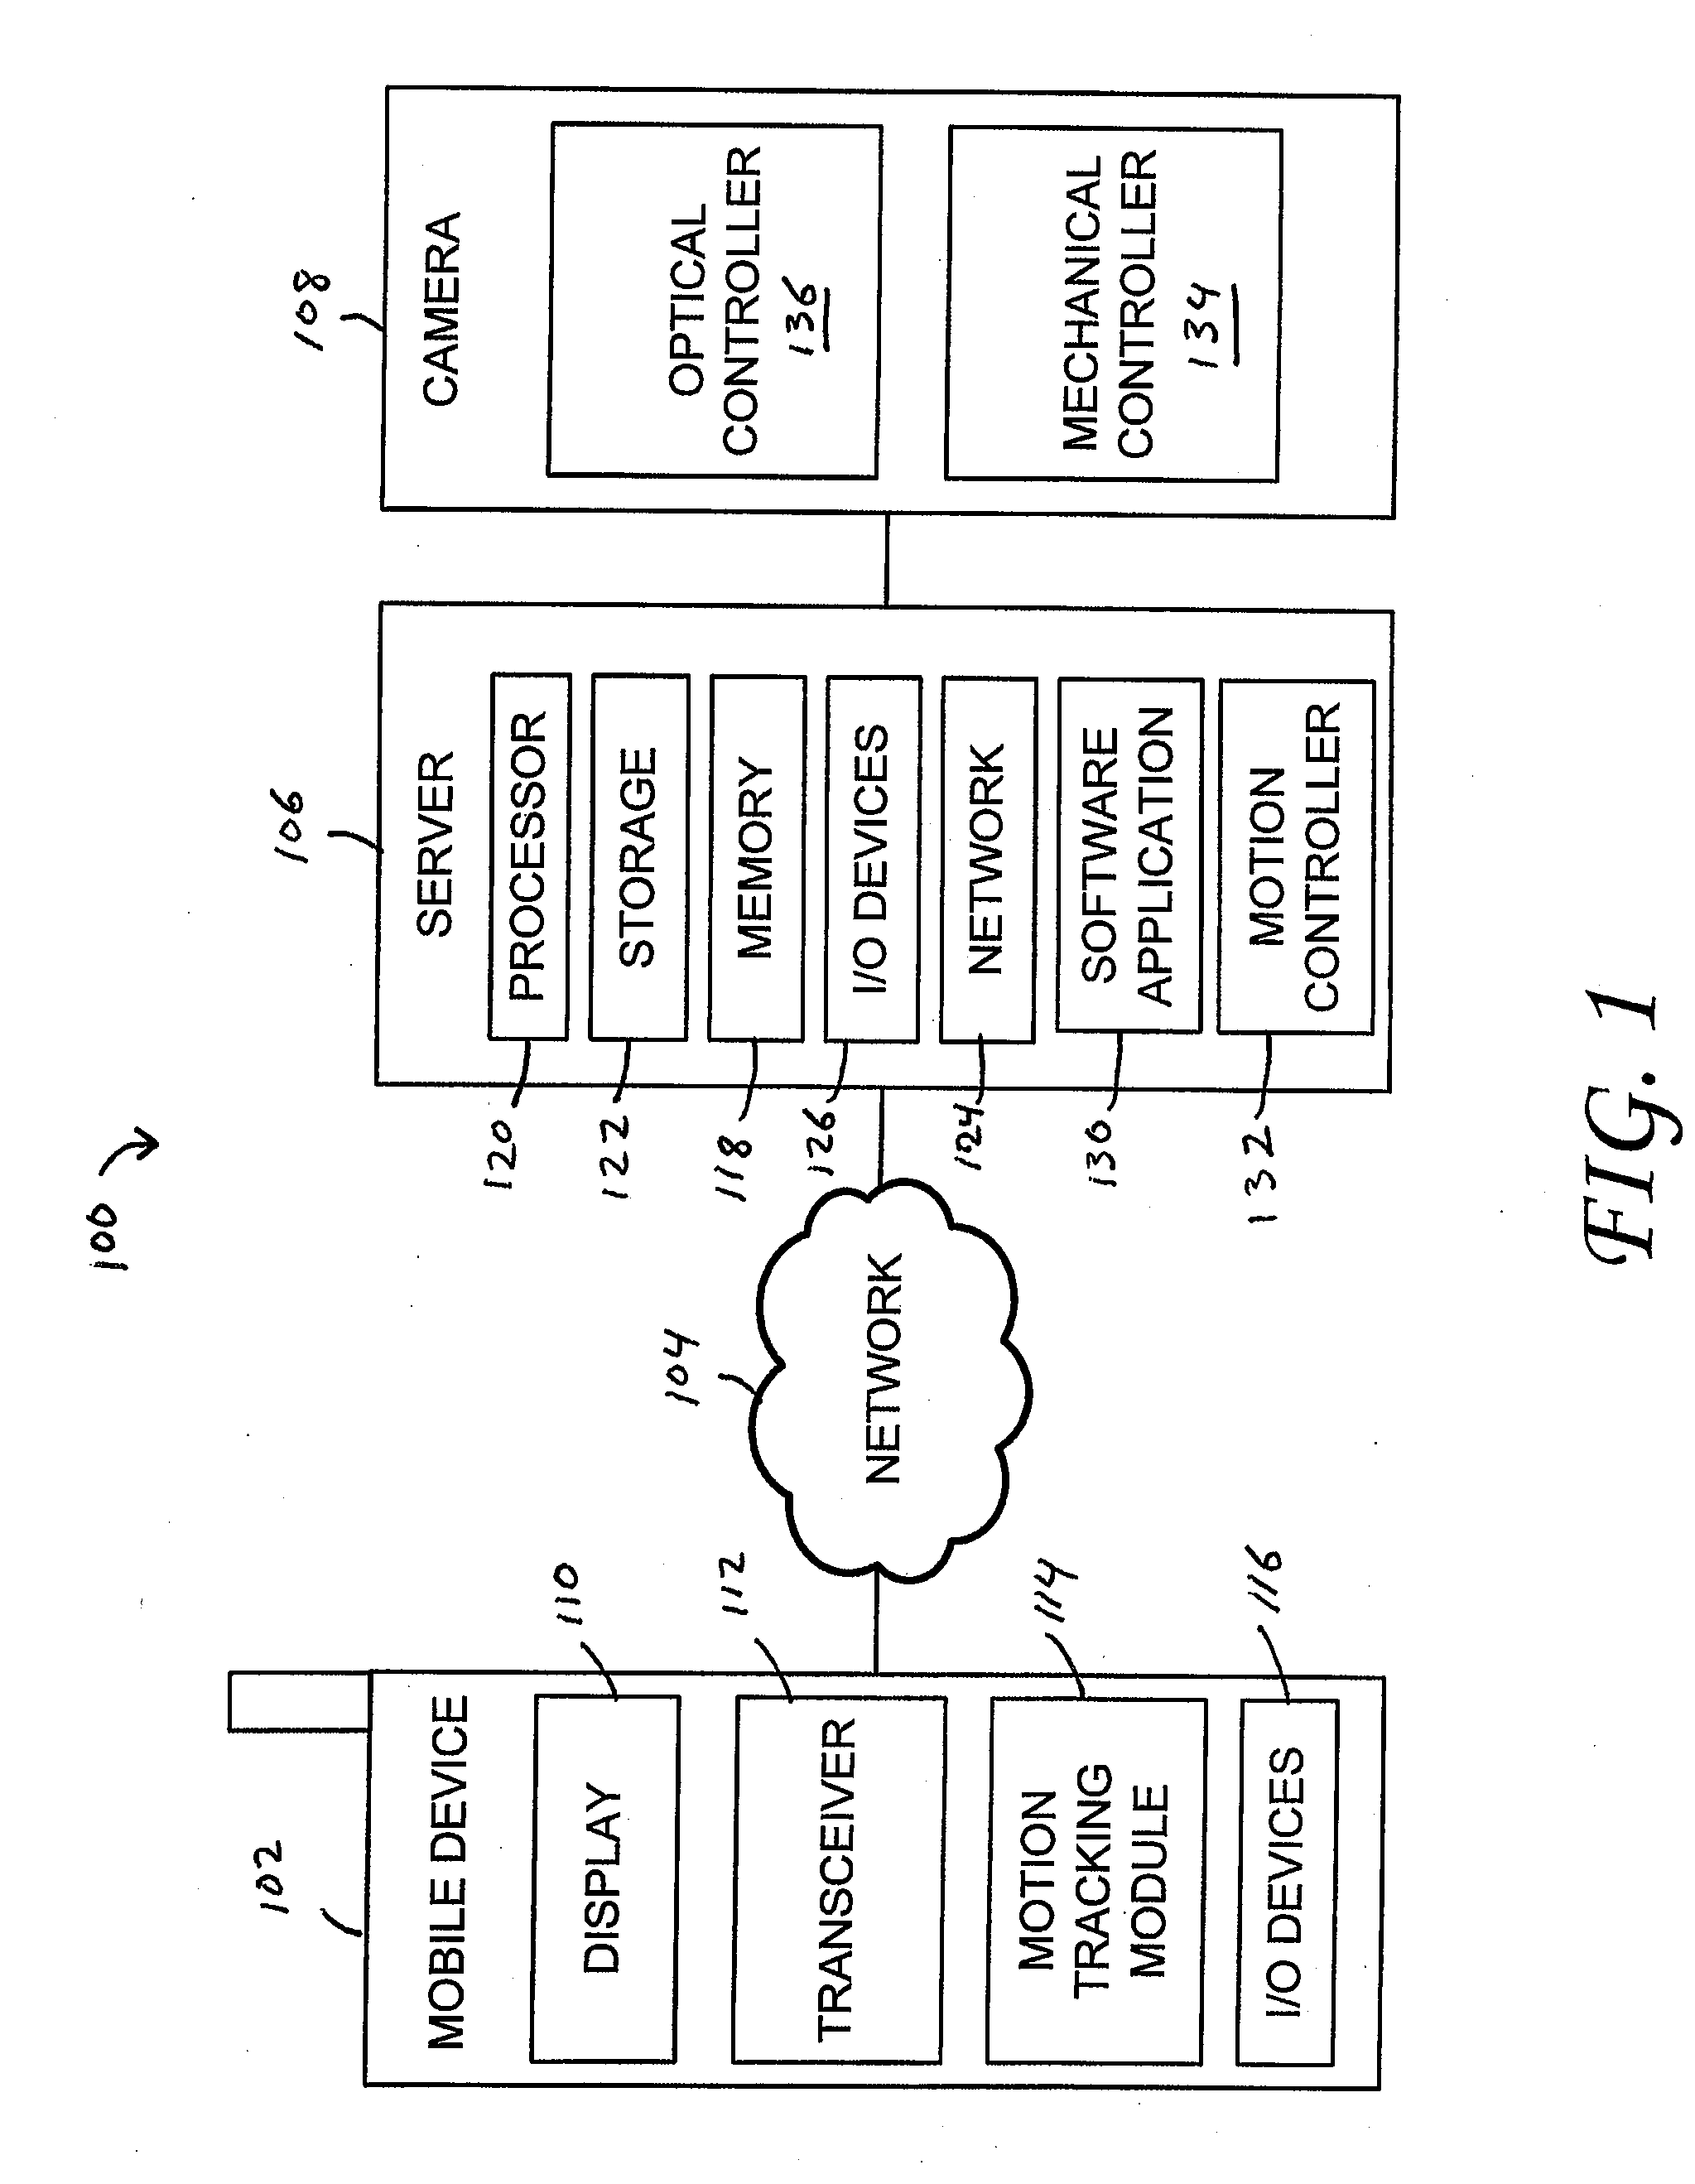 Methods and apparatus for controlling a networked camera